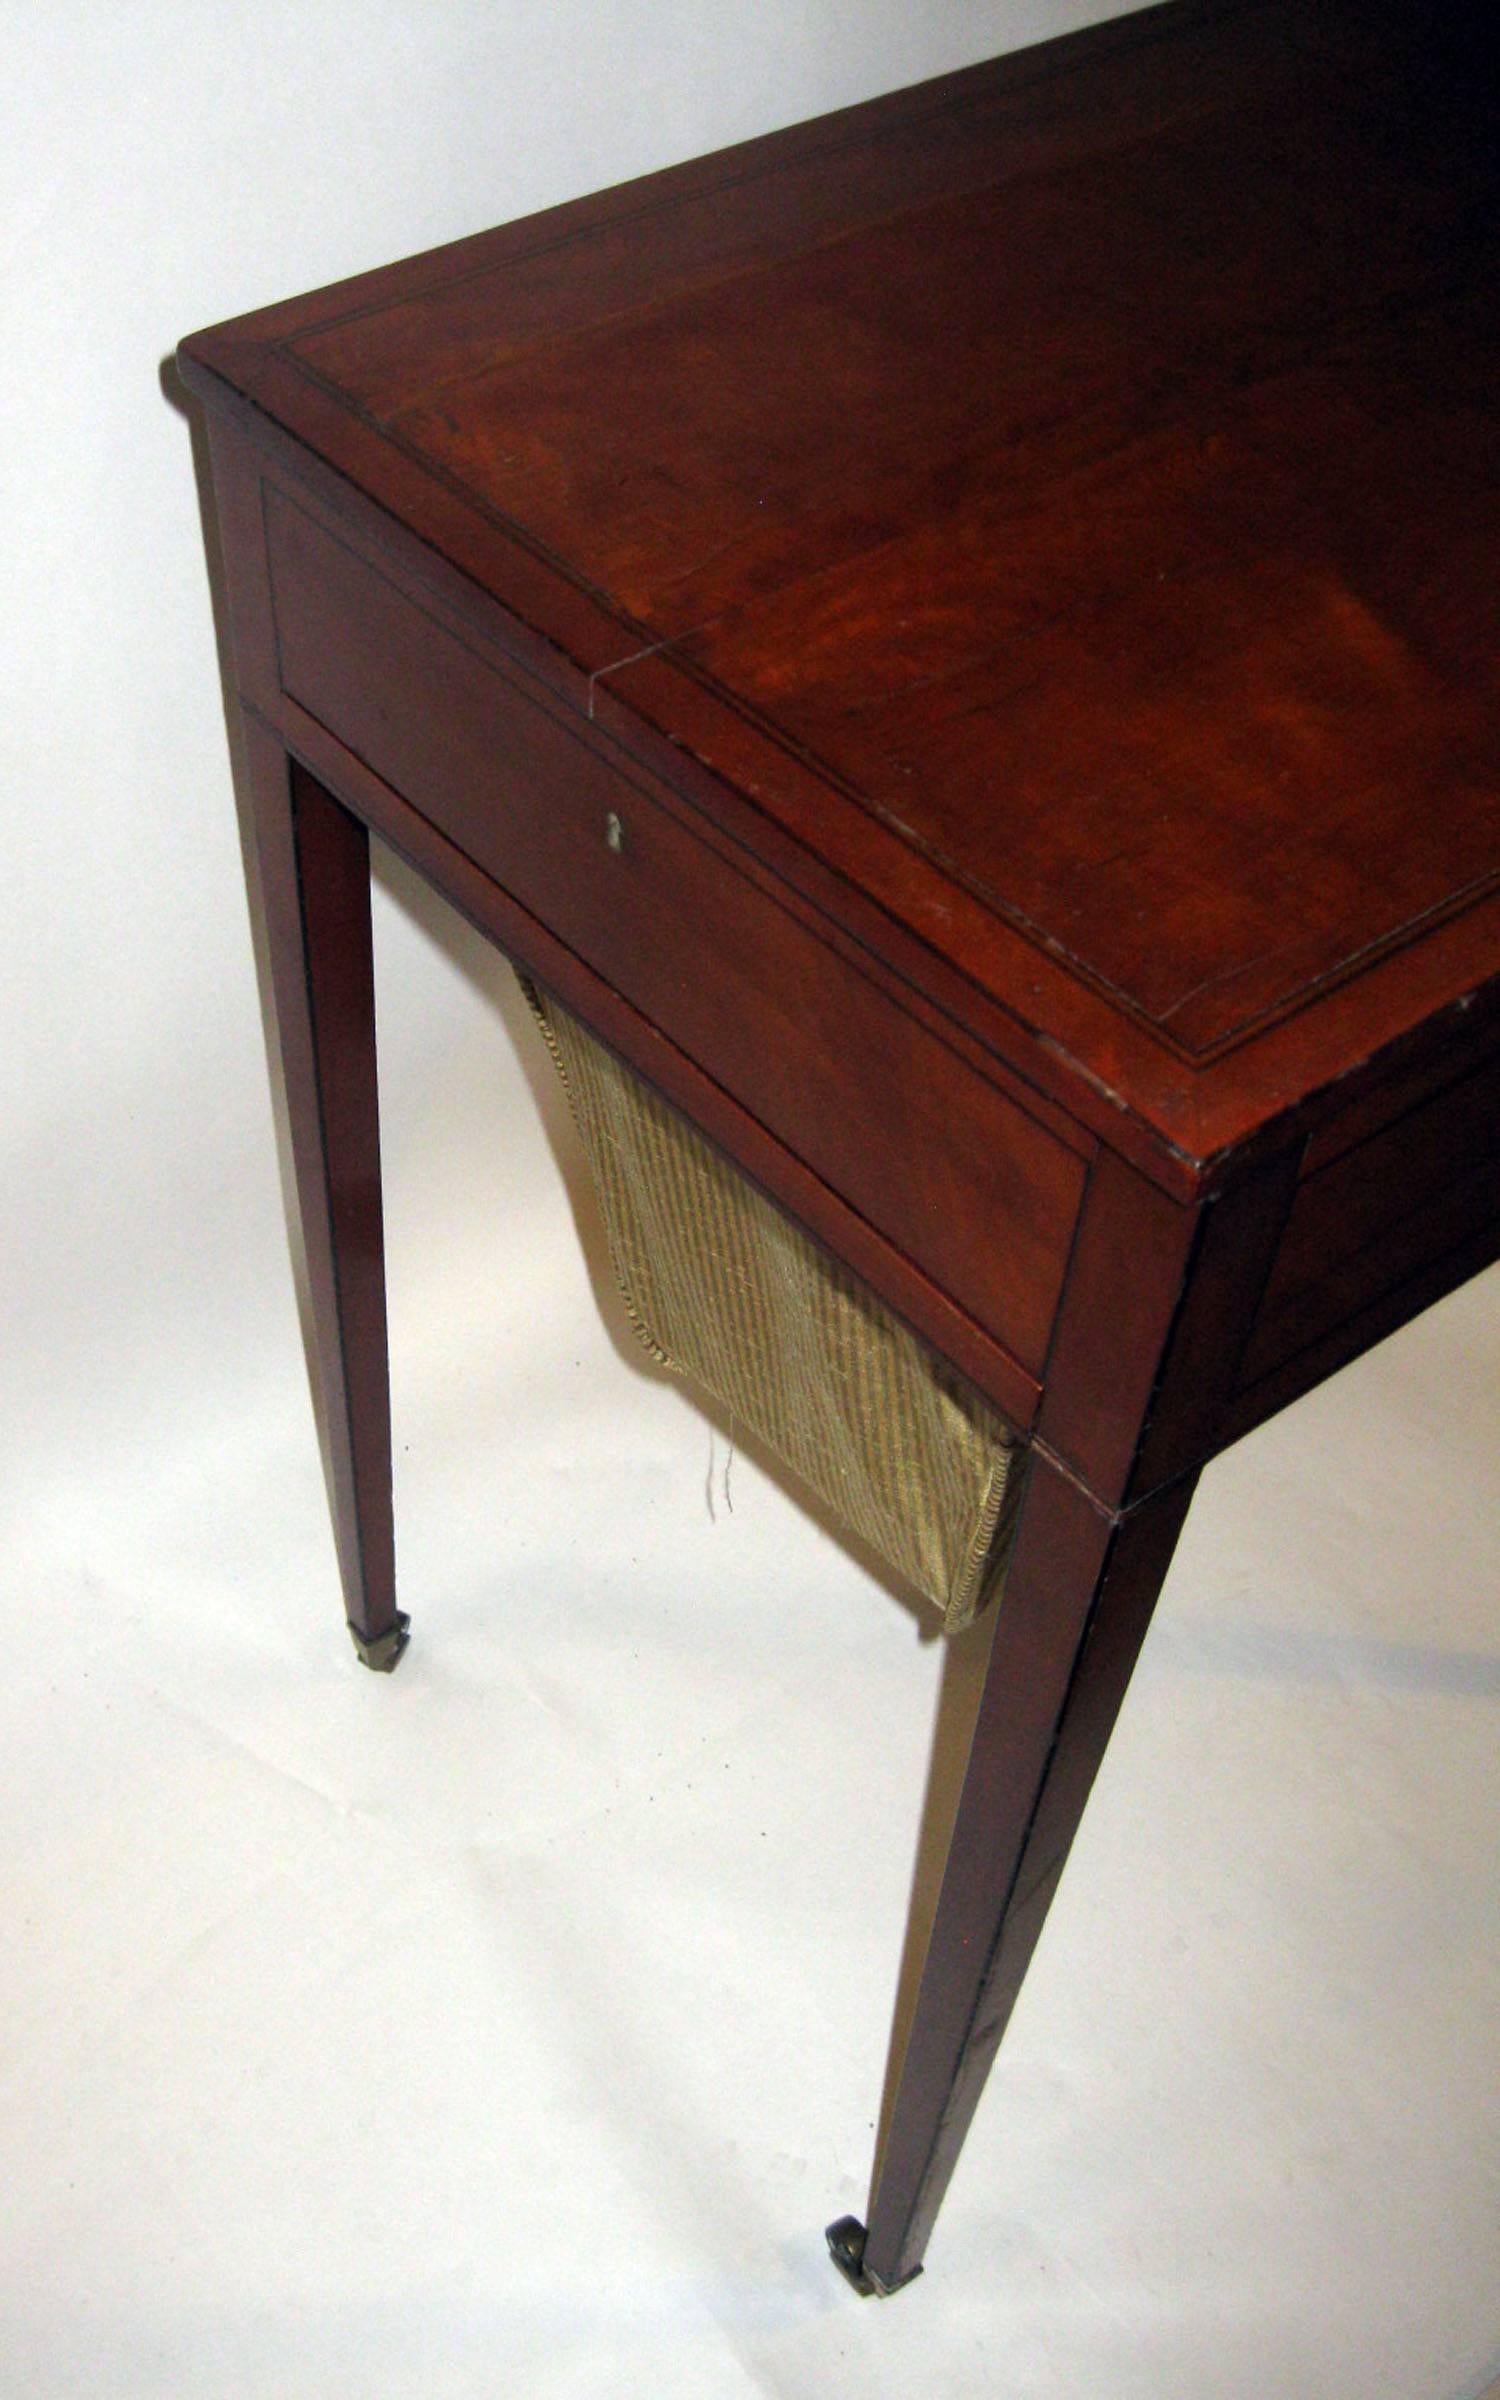 18th century Hepplewhite Satinwood Writing Table with Work with Silk Basket For Sale 4